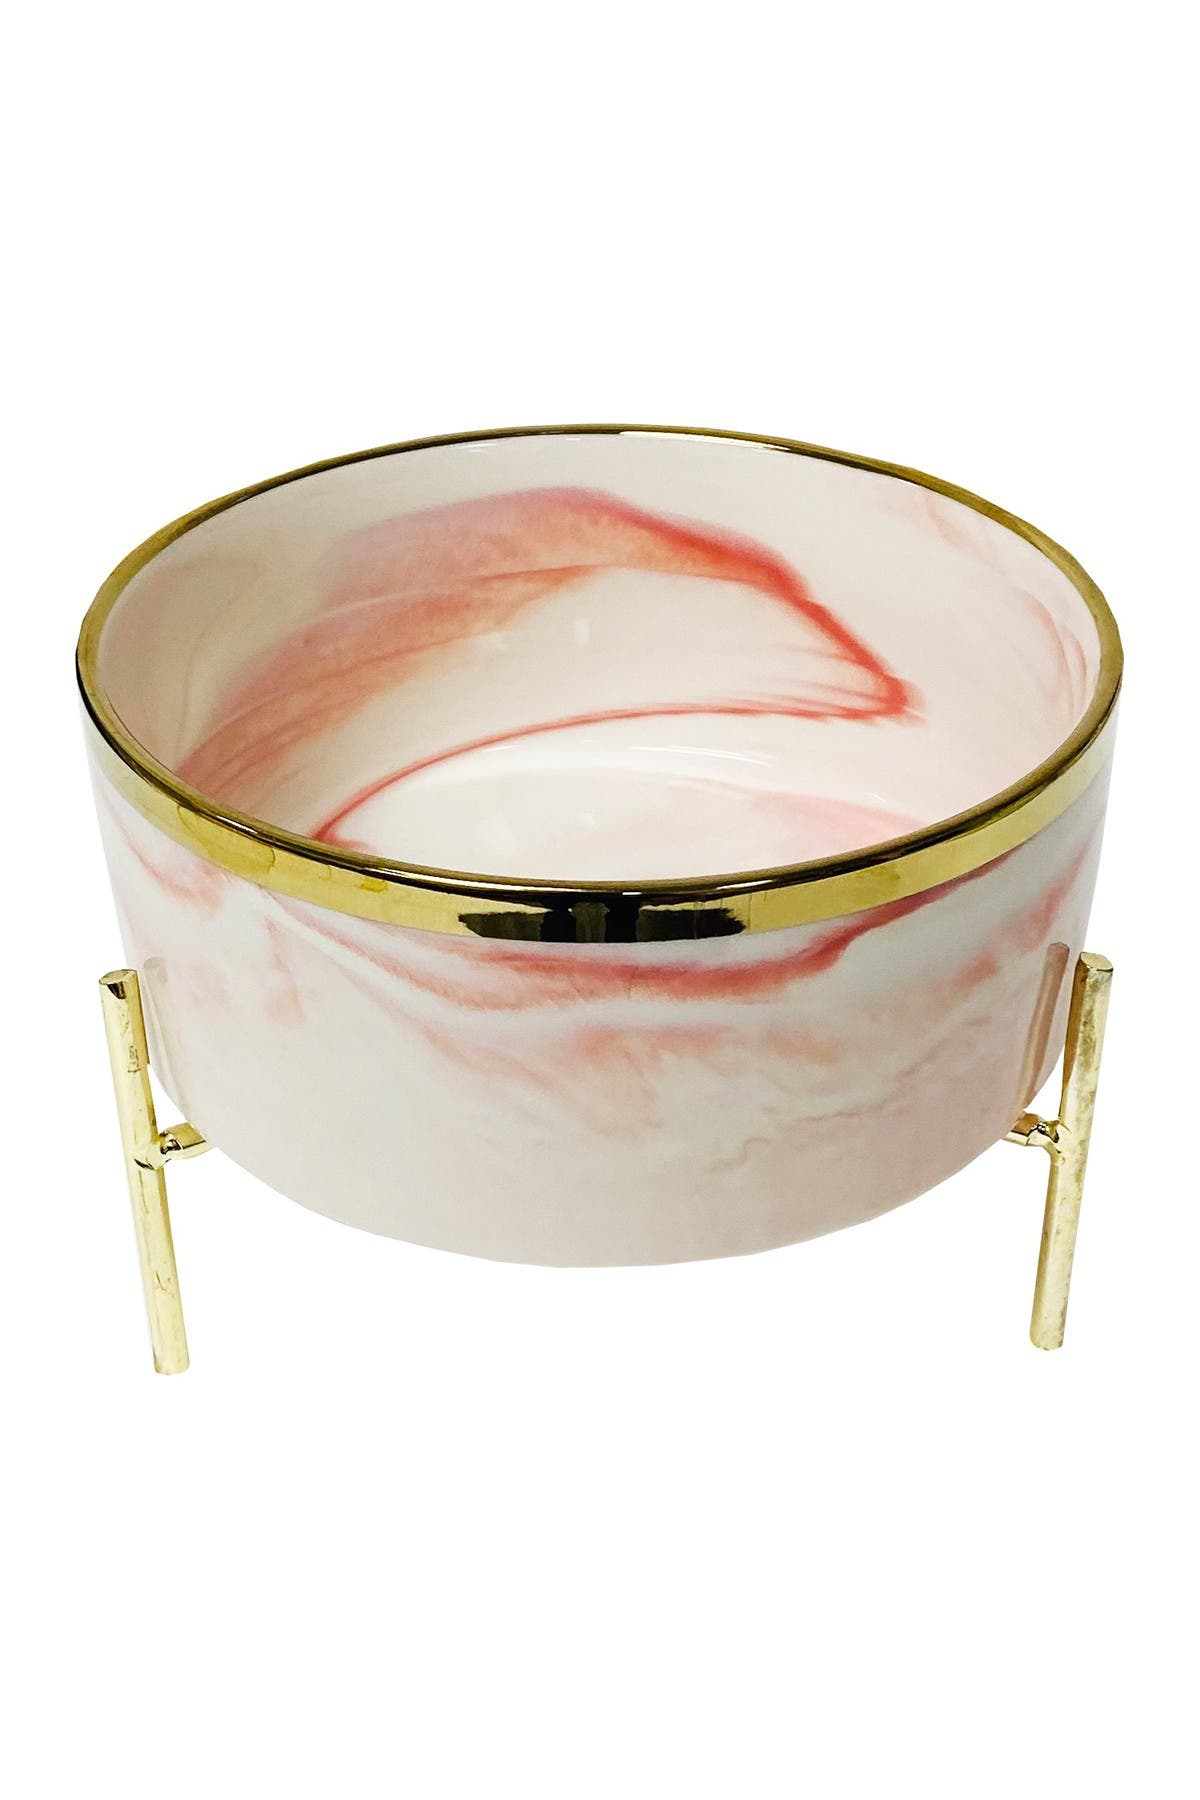 Dogs Of Glamour Zeus Luxury Dog Bowl In Pink